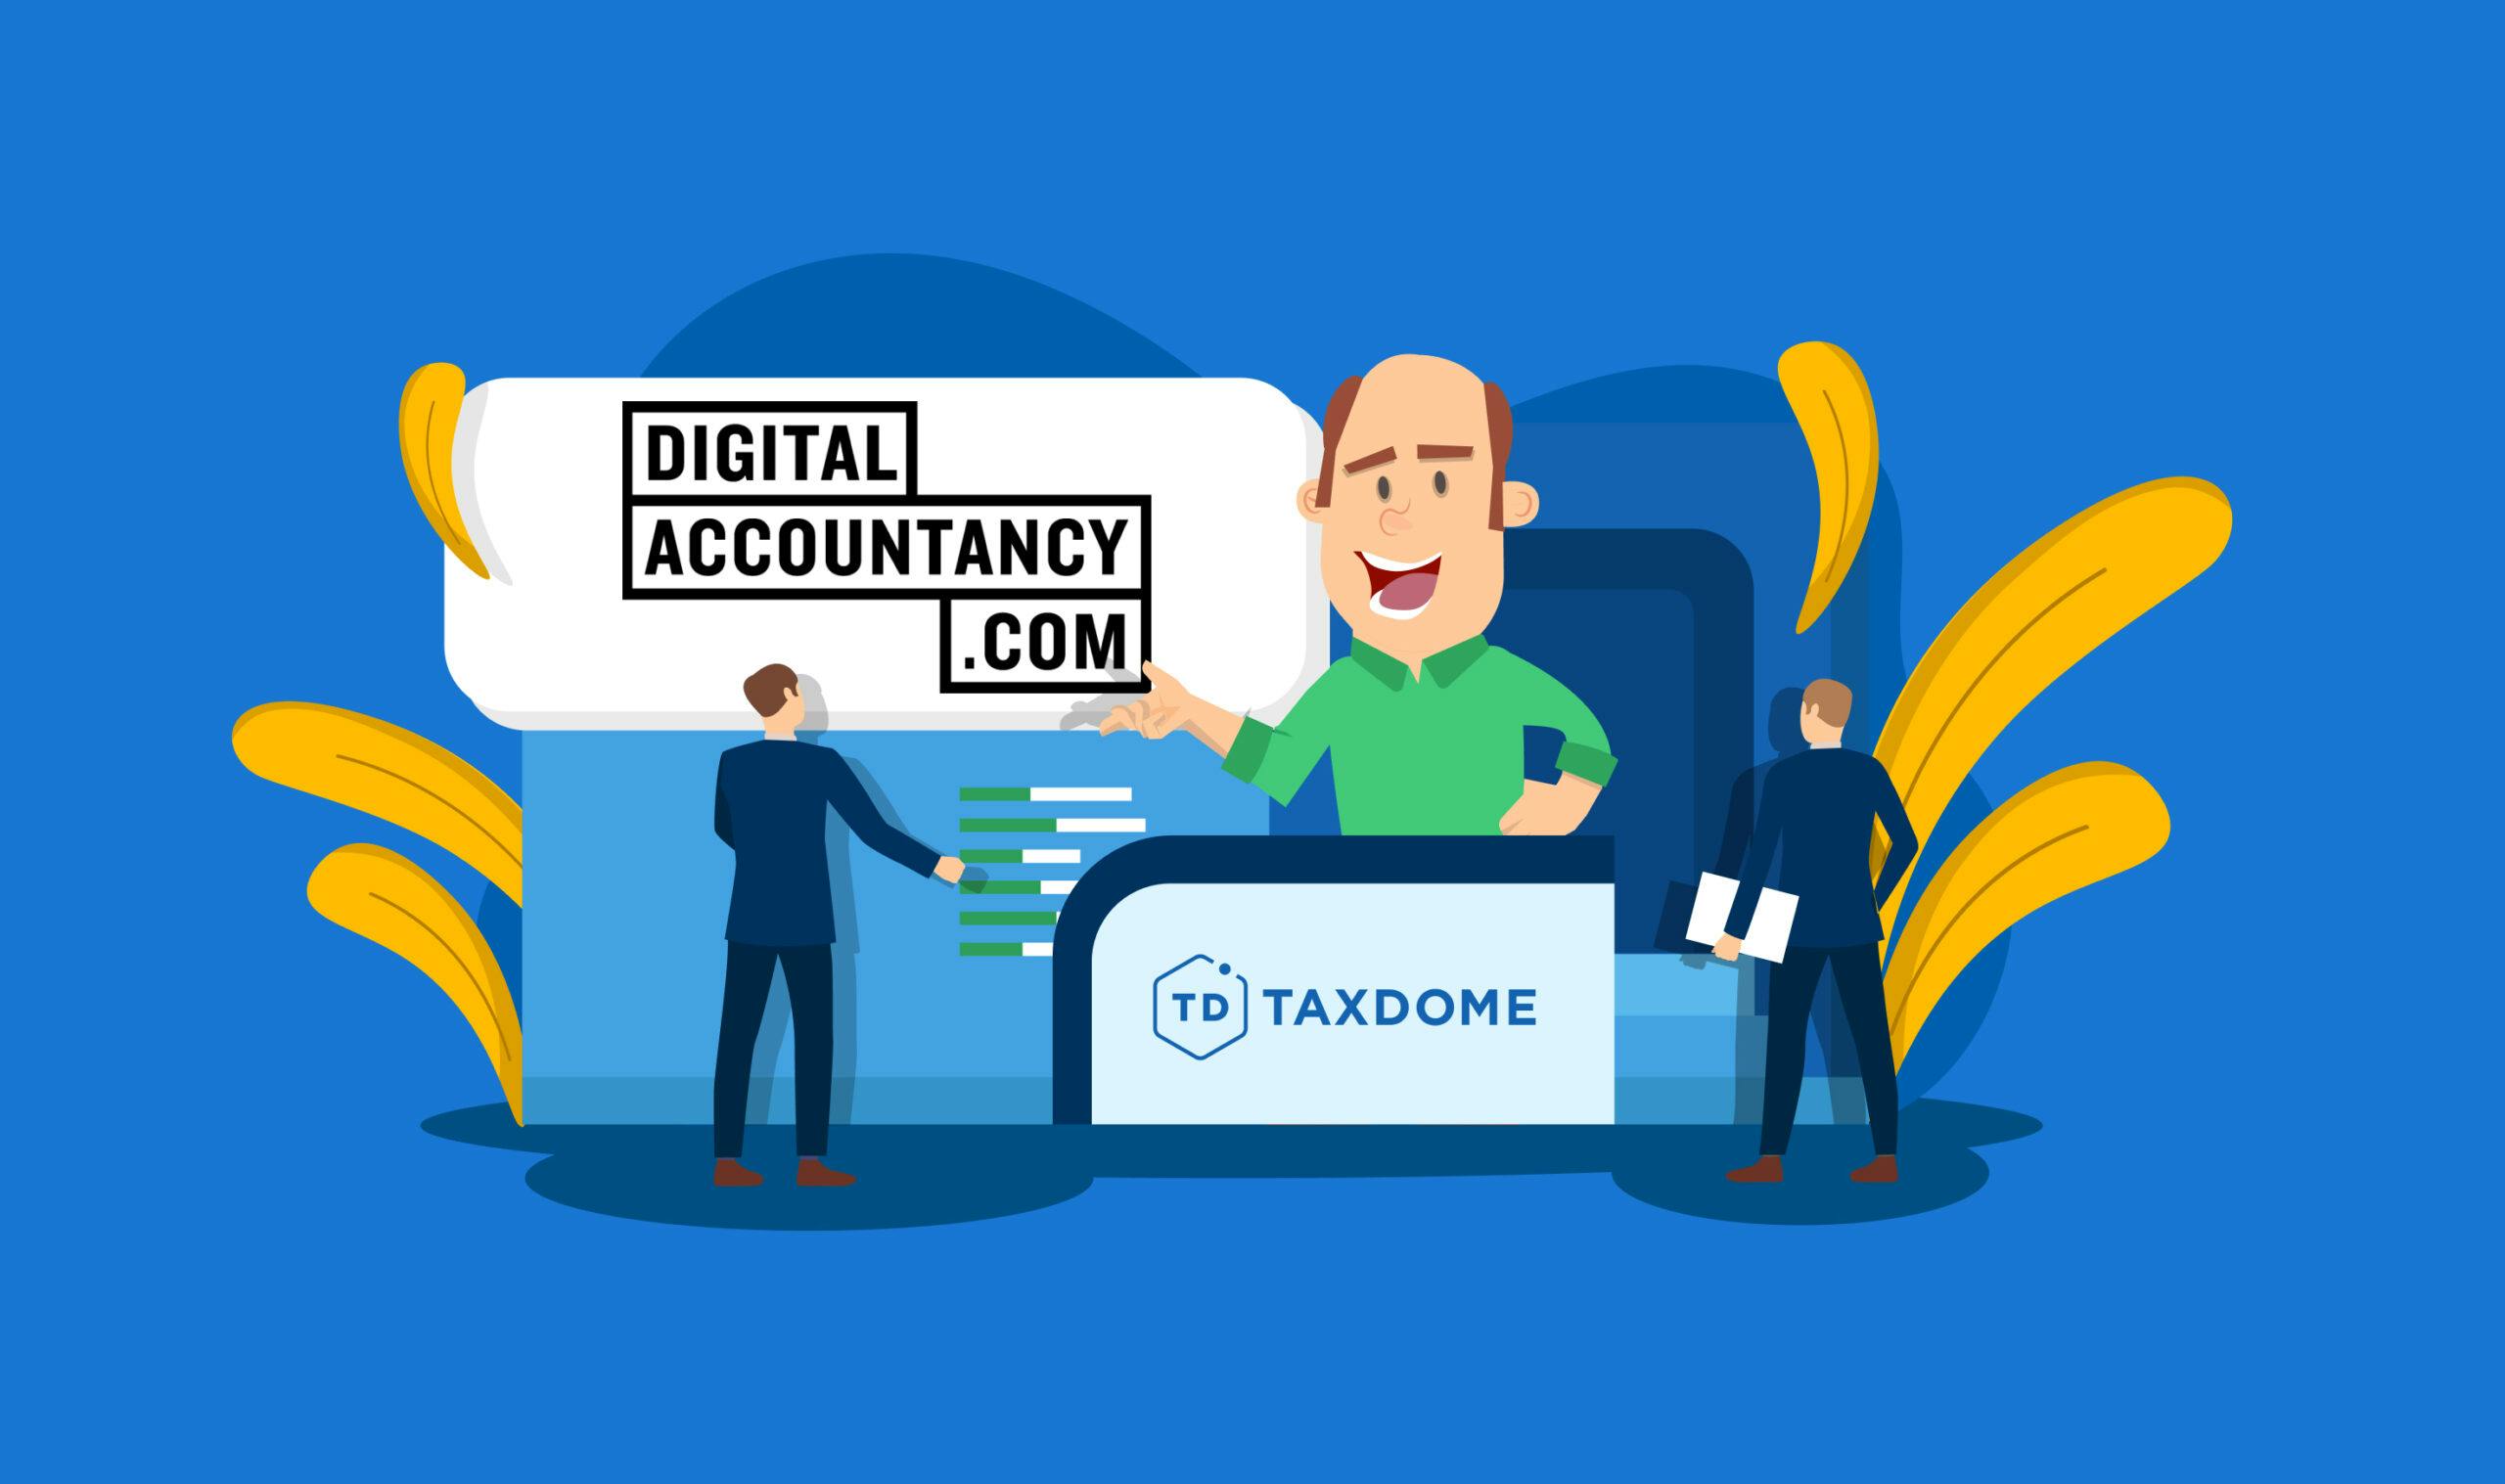 TaxDome at the Digital Accountancy Show